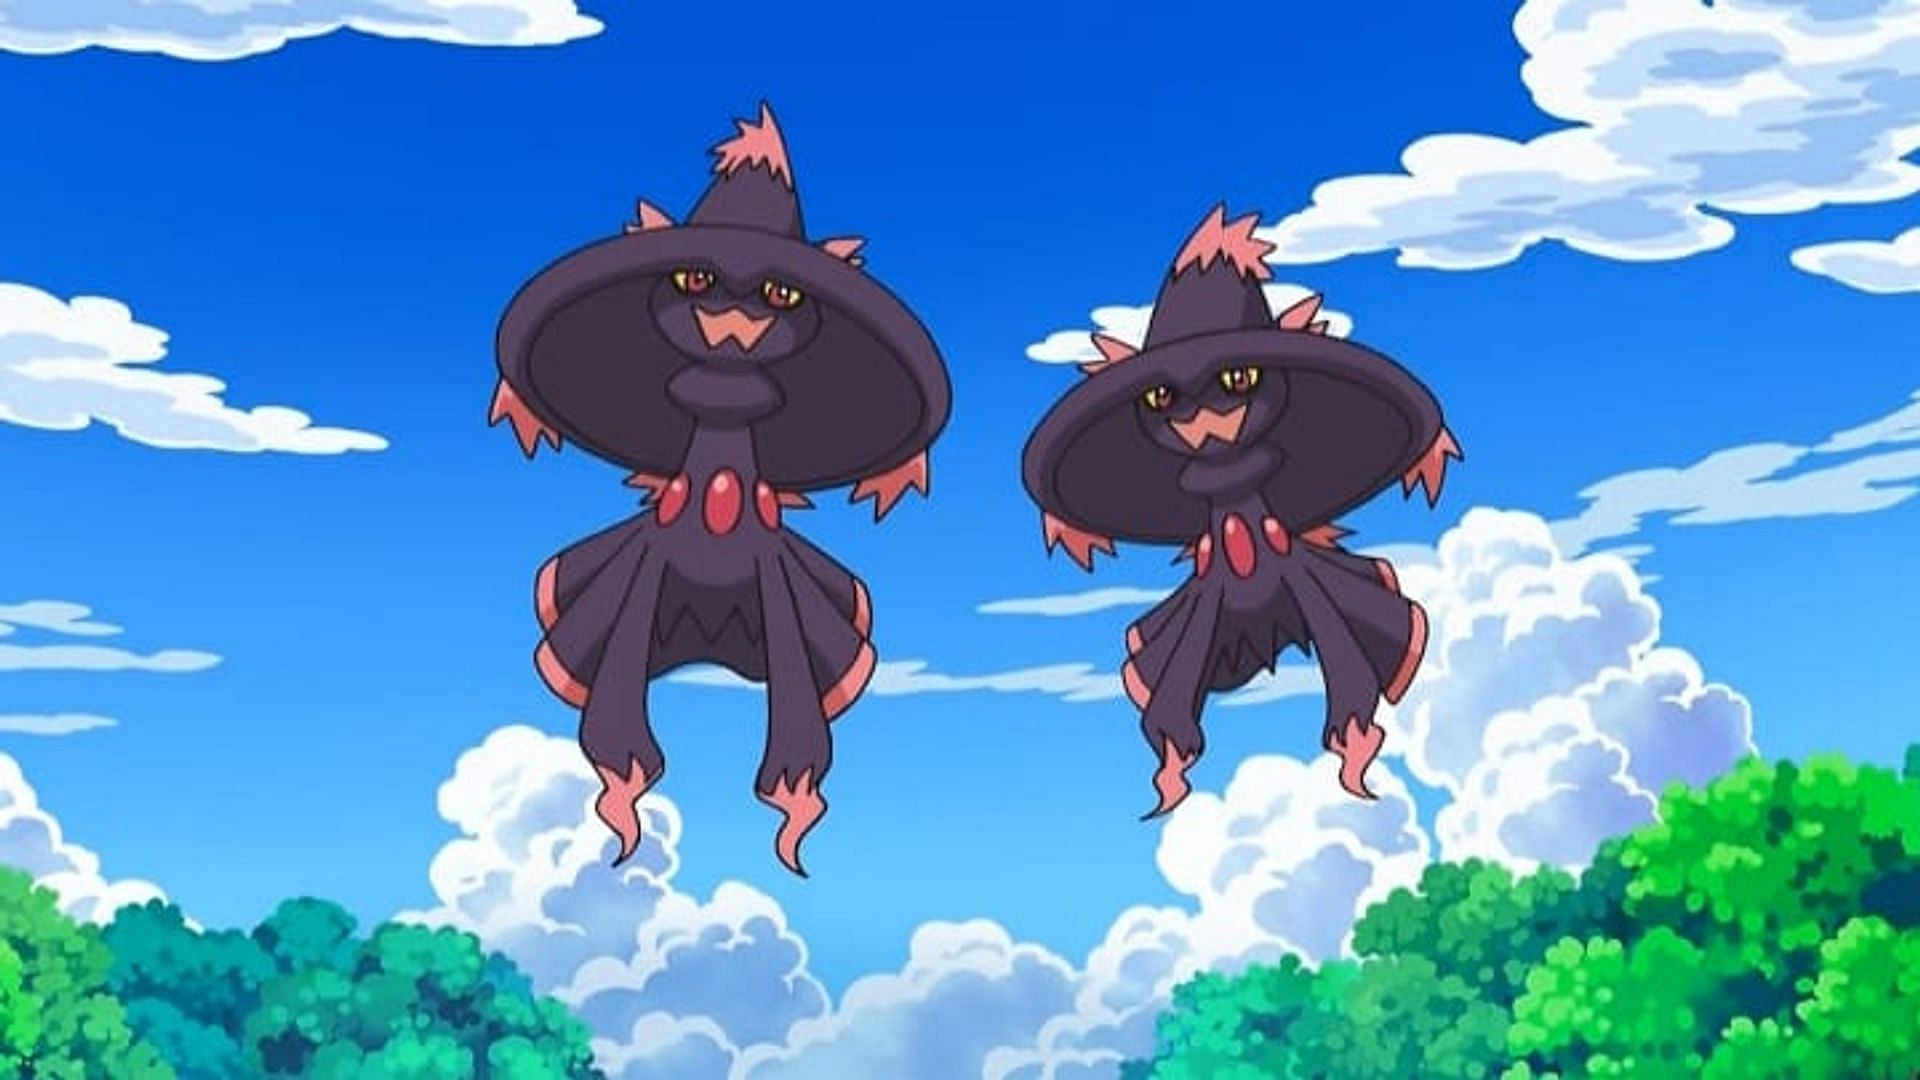 Mismagius is one of the Pokemon introduced in the fourth generation of the Pokemon franchise despite its pre-evolved form being from the second generation (Image via The Pokemon Company)